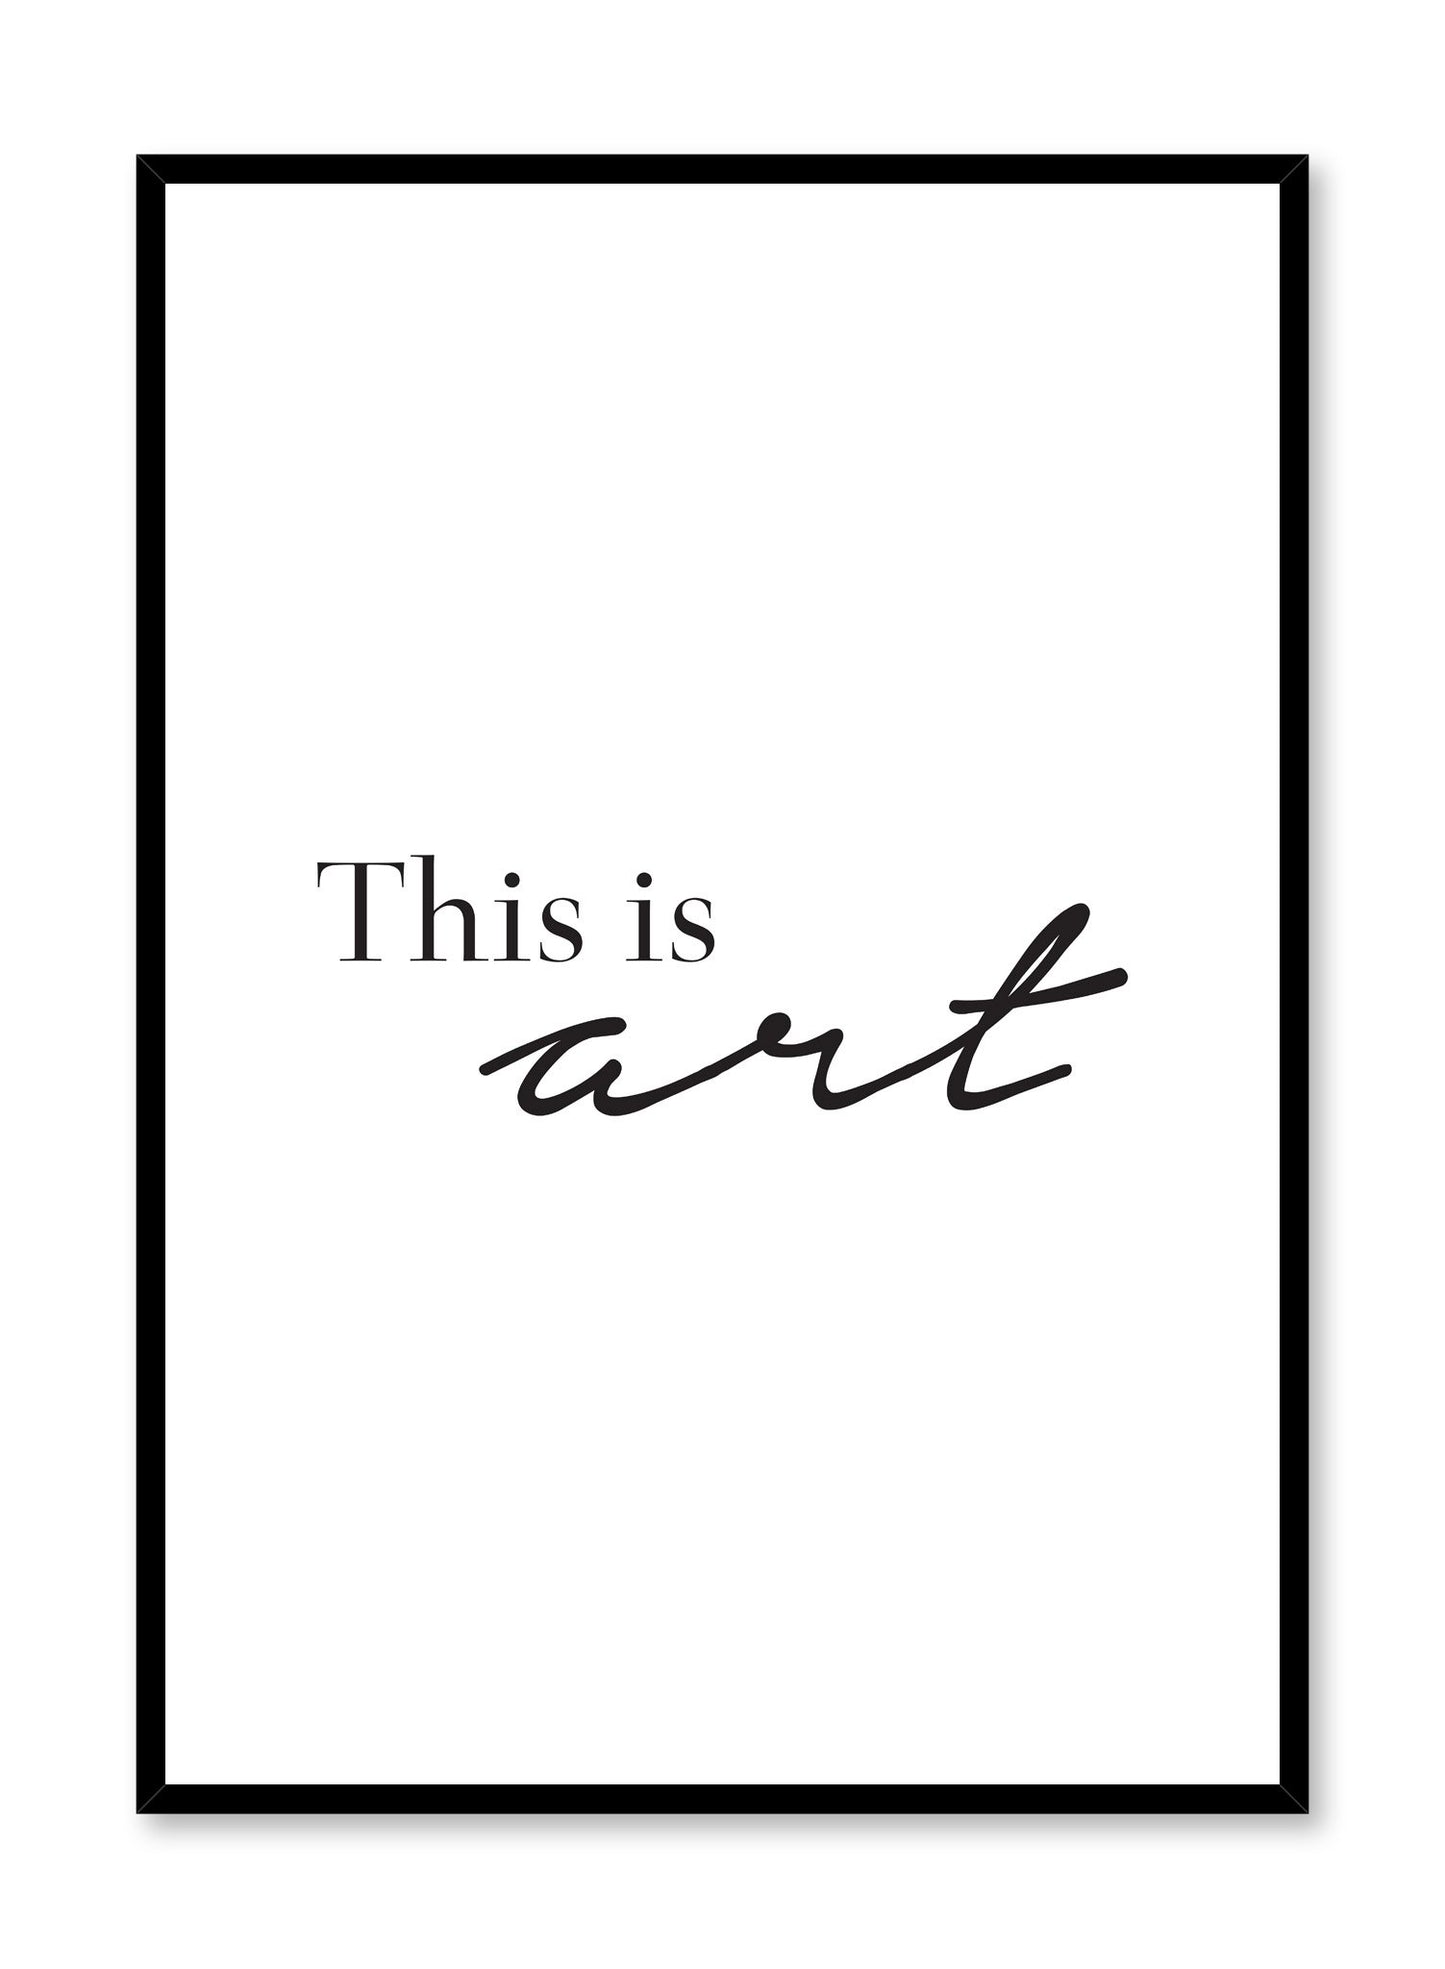 Modern minimalist art print by Opposite Wall with this is art text